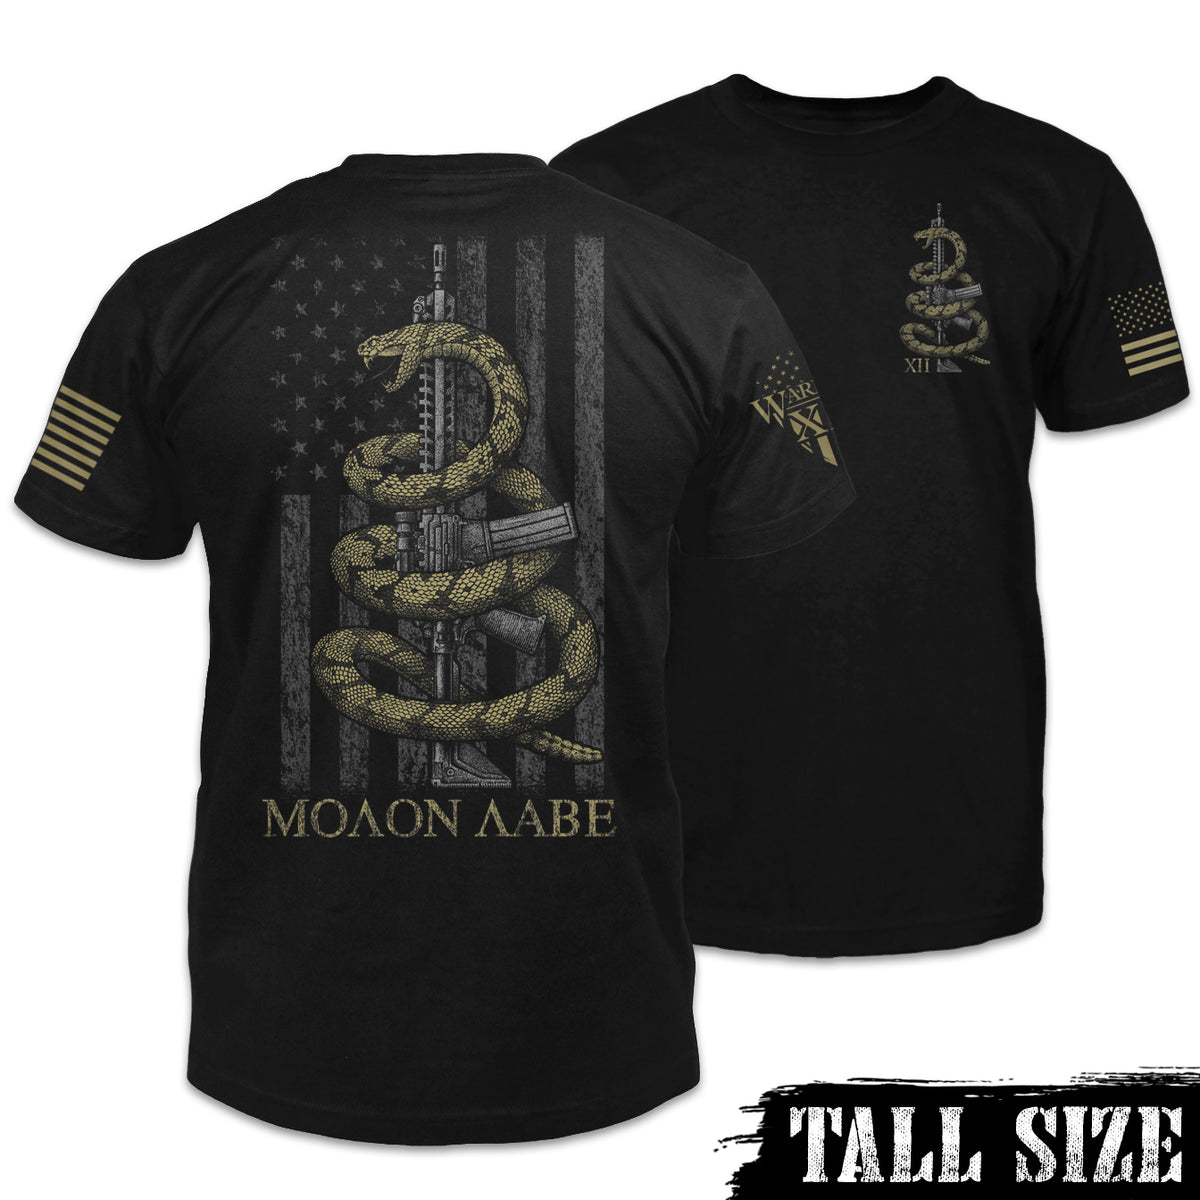 Front & back black tall size shirt with the words 'Molon Labe,' meaning "Come and Take," and a coiled rattlesnake ready to defend an AR-15 printed on the shirt.